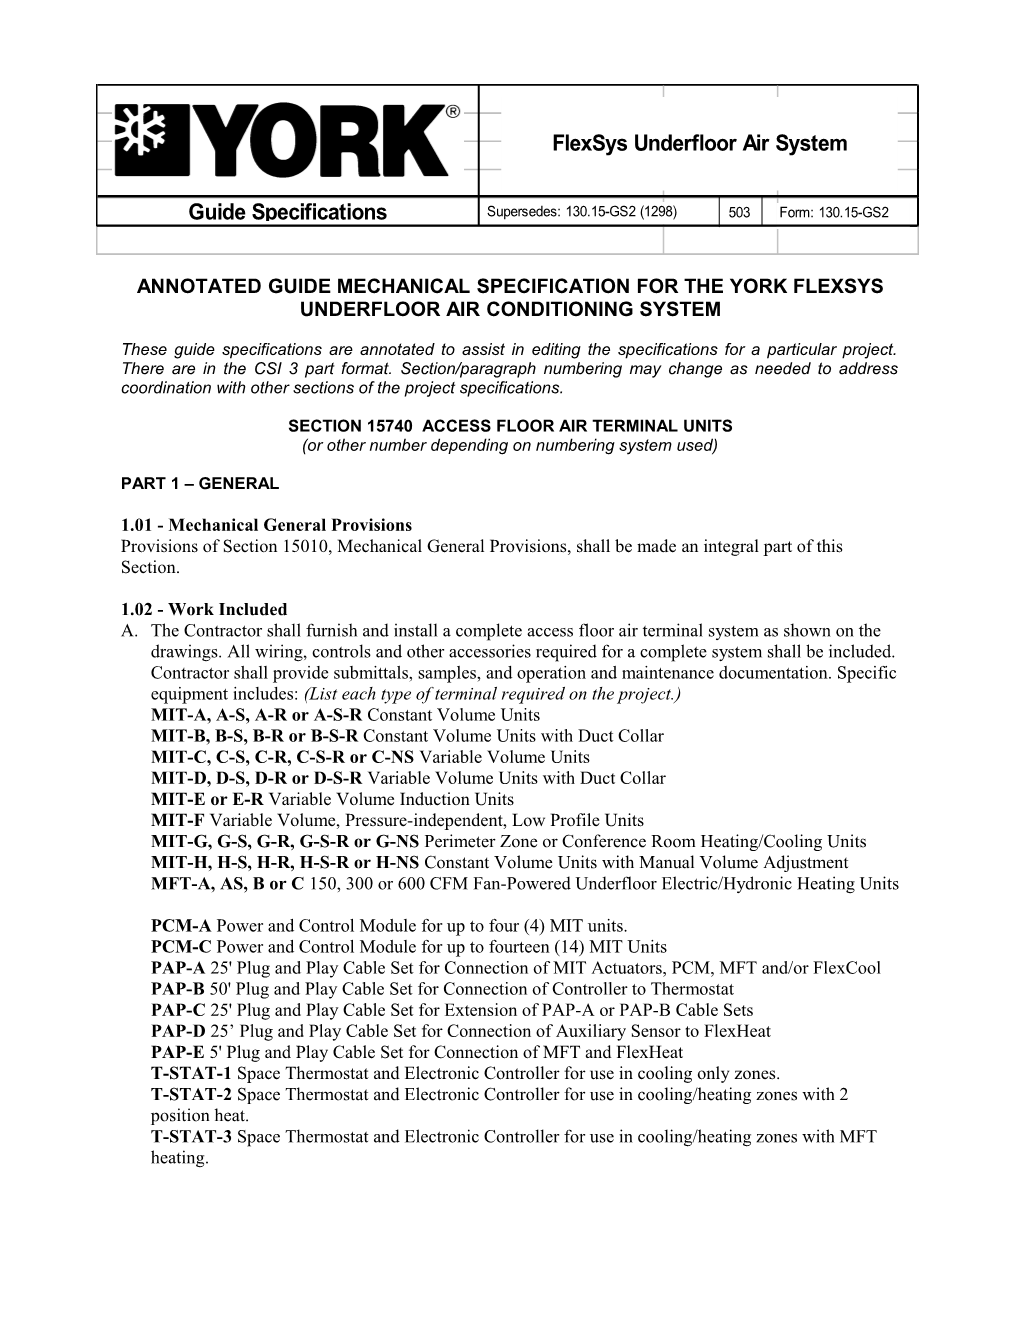 Annotated Guide Mechanical Specification for the York Flexsys Underfloor Air Conditioning